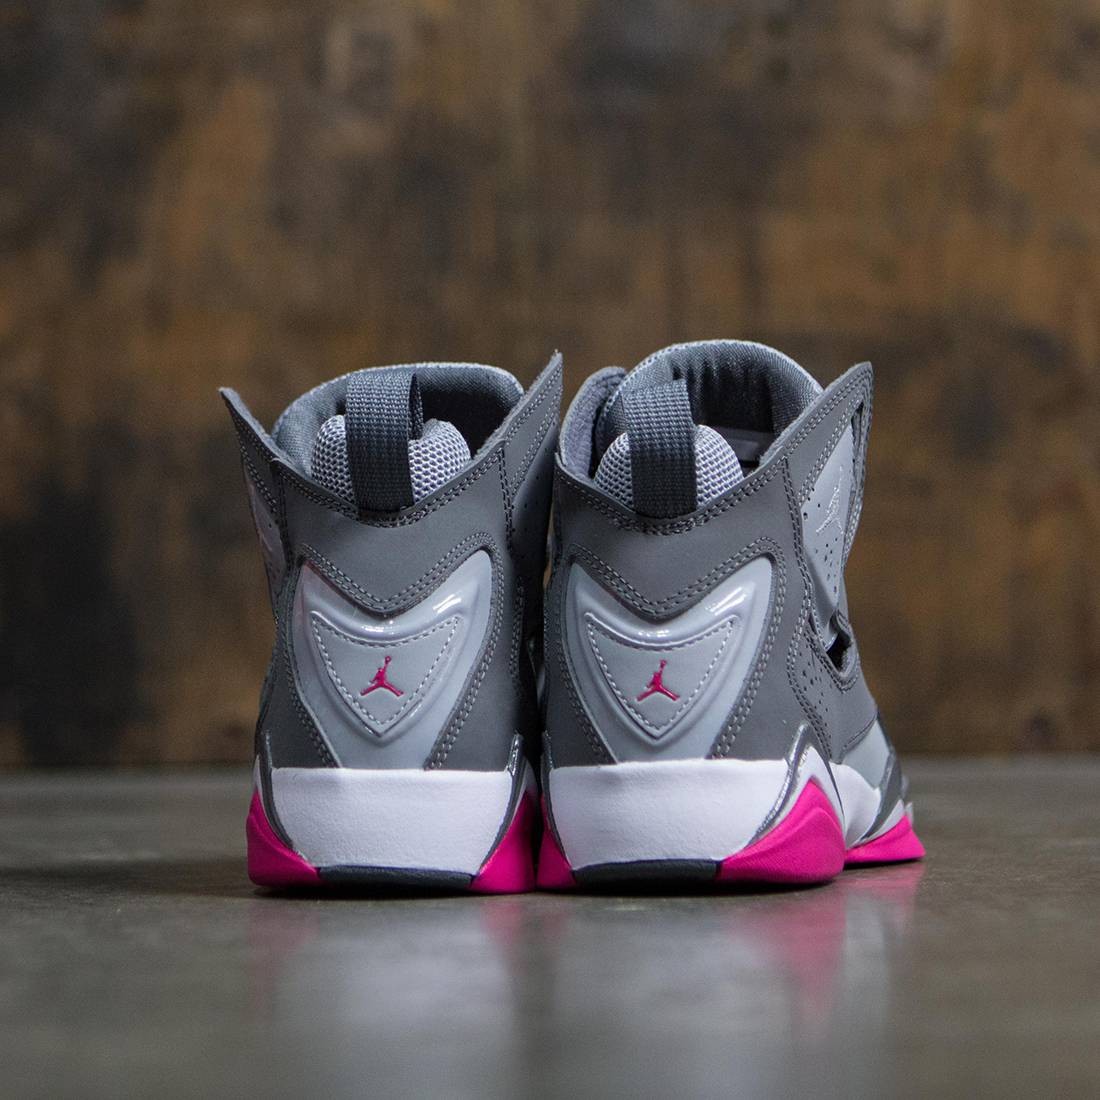 pink gray and white jordans